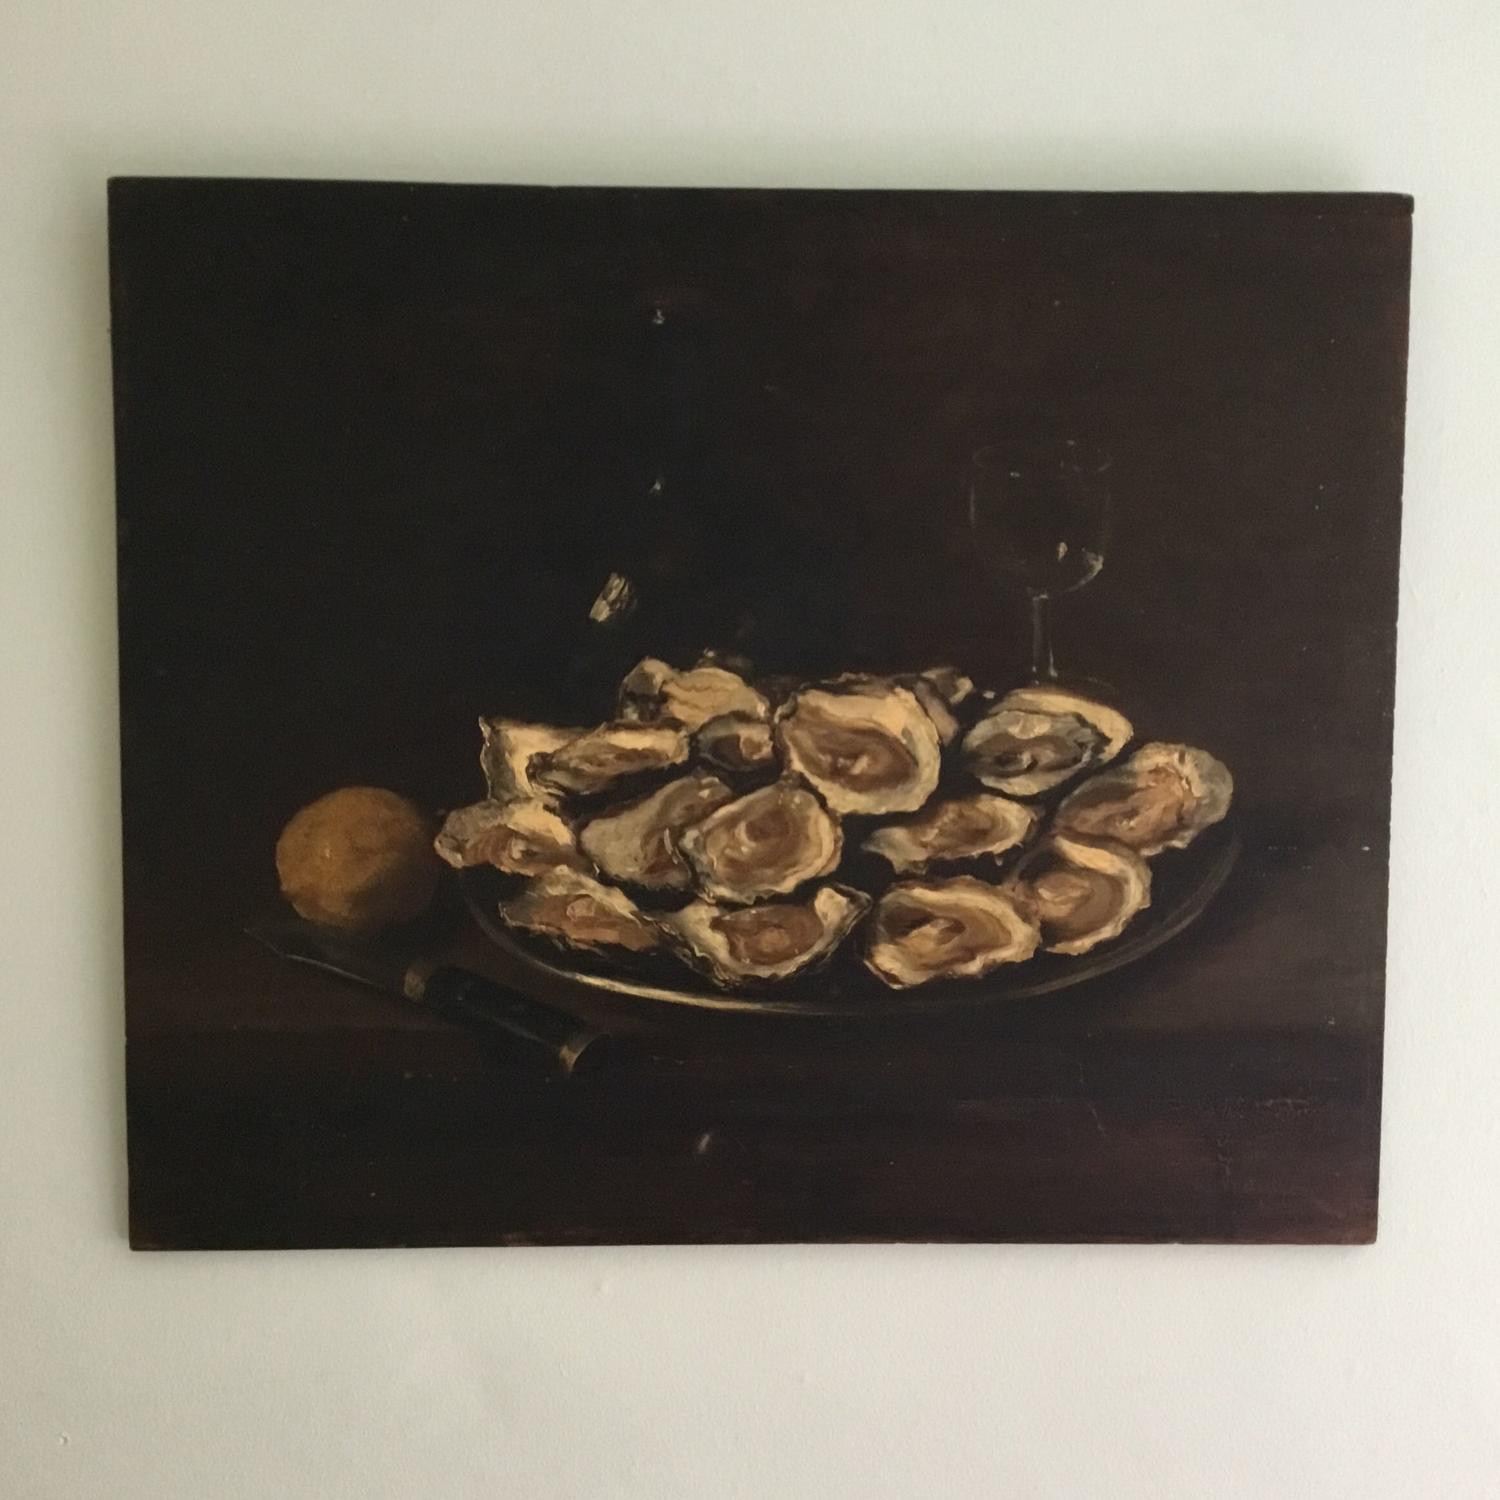 Still Life With Oysters